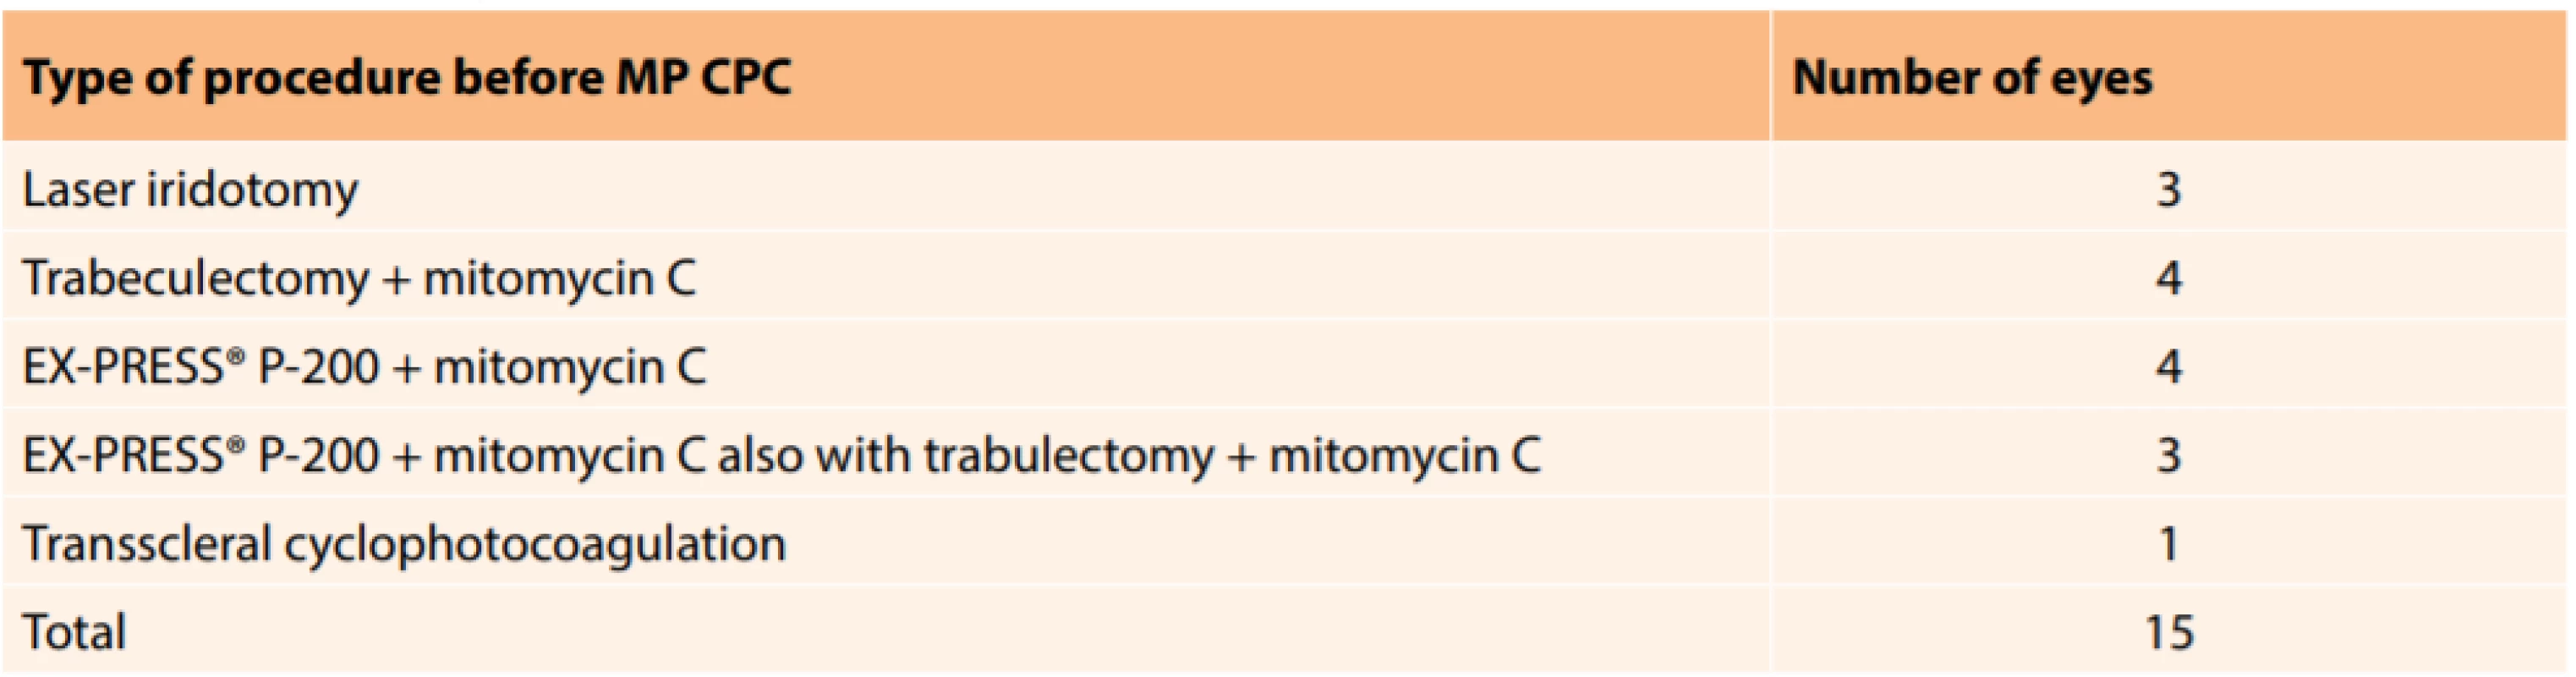 Number and type of procedures before MP CPC